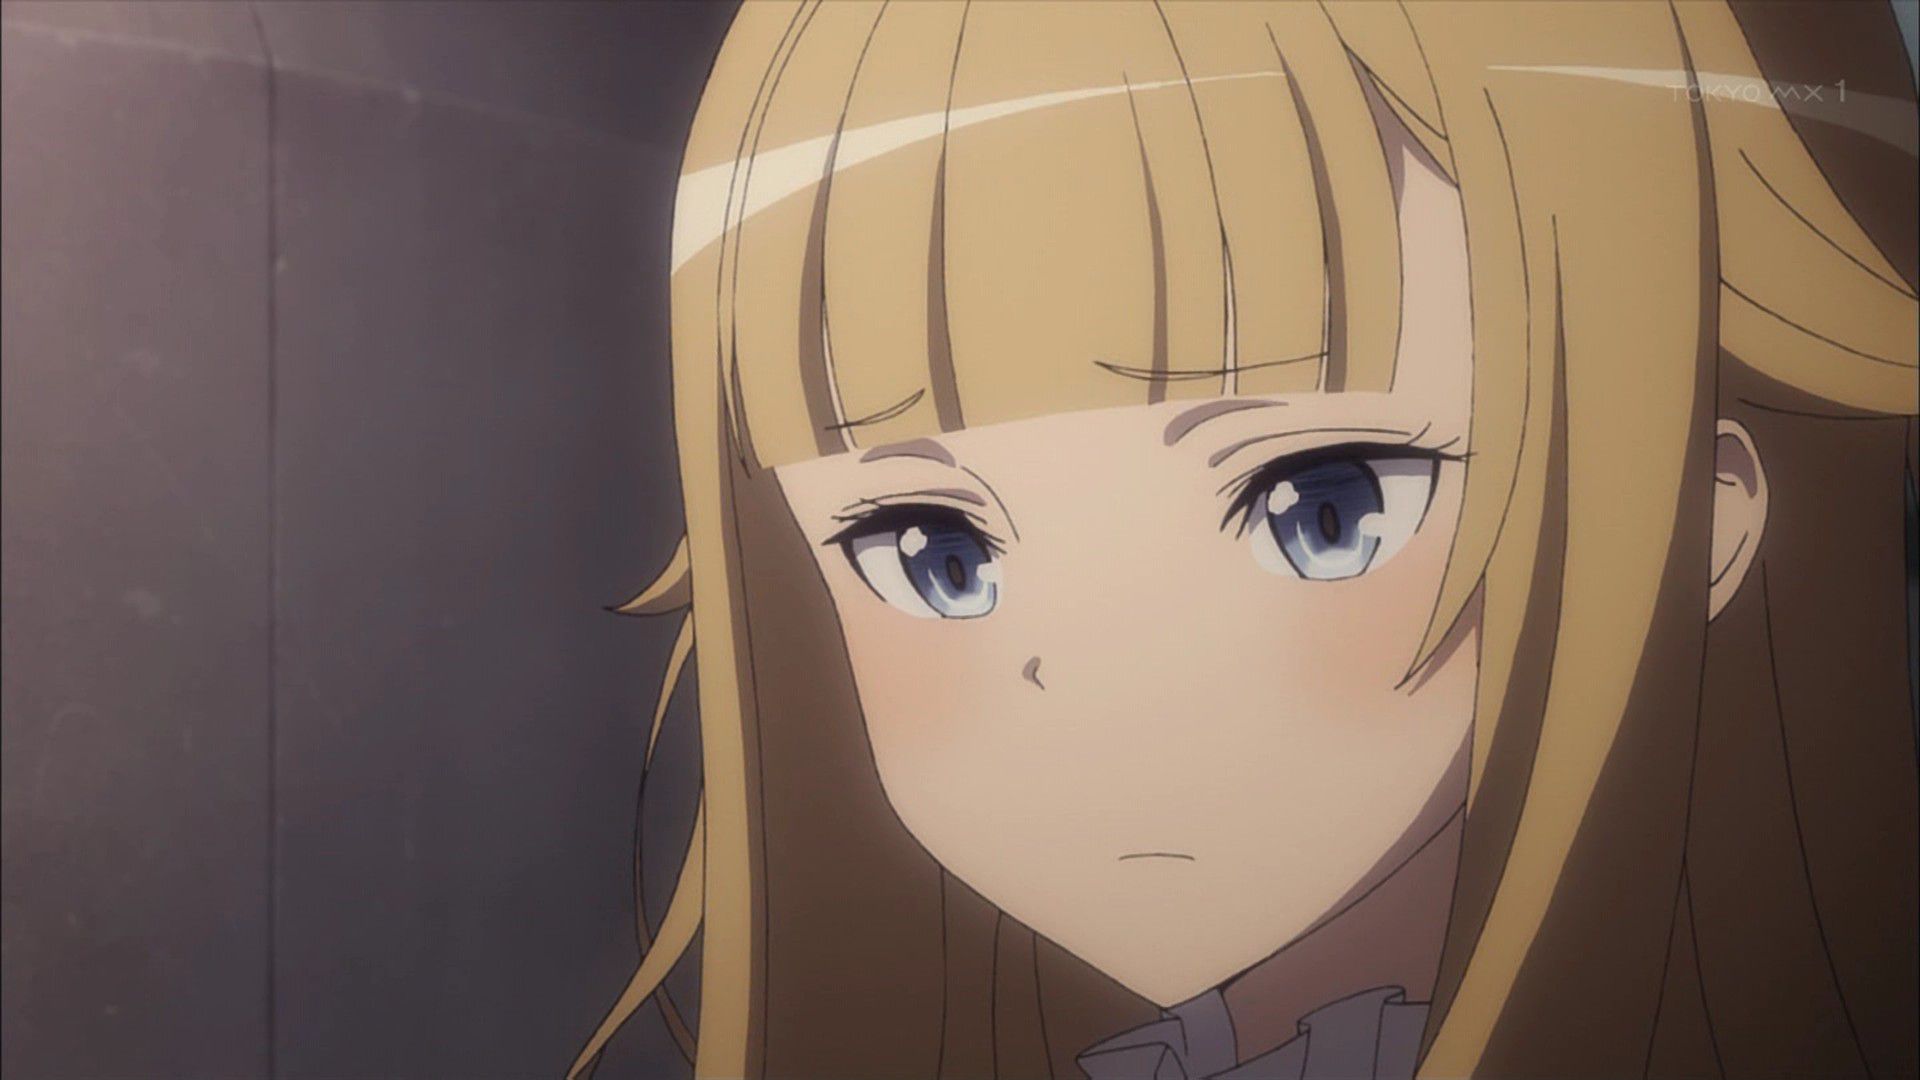 The Princess Principal 3 story, a little voice sounded, but I forgave the last bold confession 4